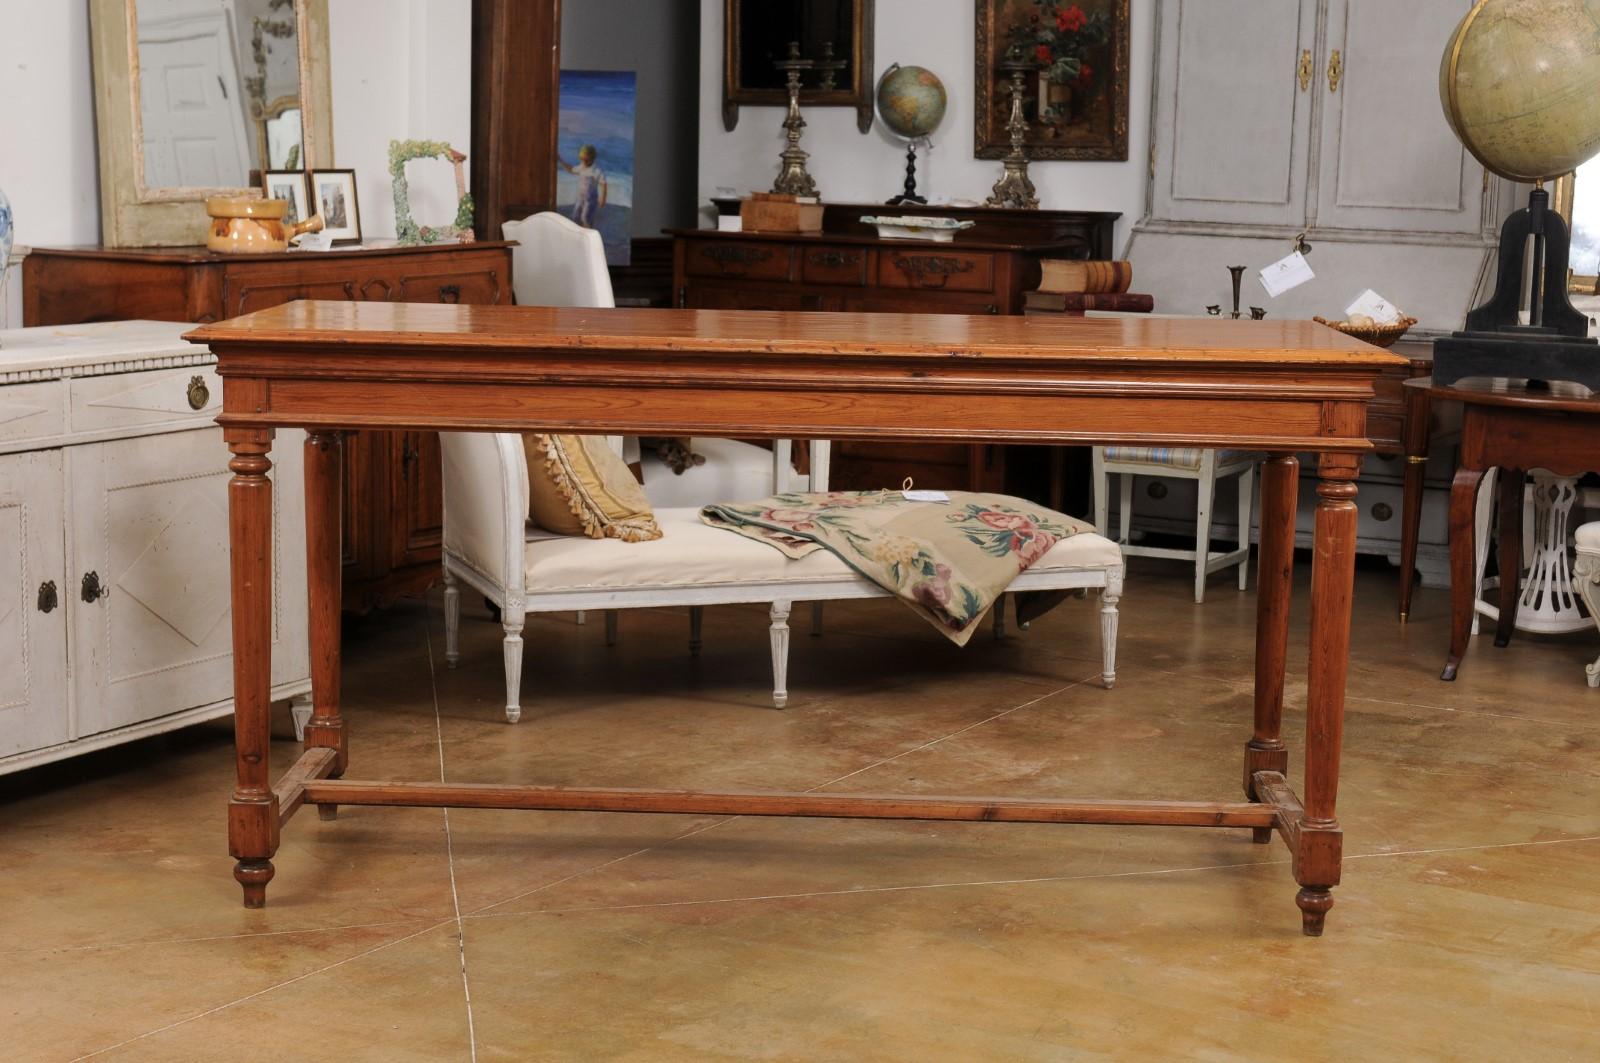 A French Louis XVI style high bar pine table from the 20th century, with cylindrical tapering legs, toupie feet and H-Form cross stretcher. Created in France during the 20th century, this pine bar table showcases the stylistic characteristics of the